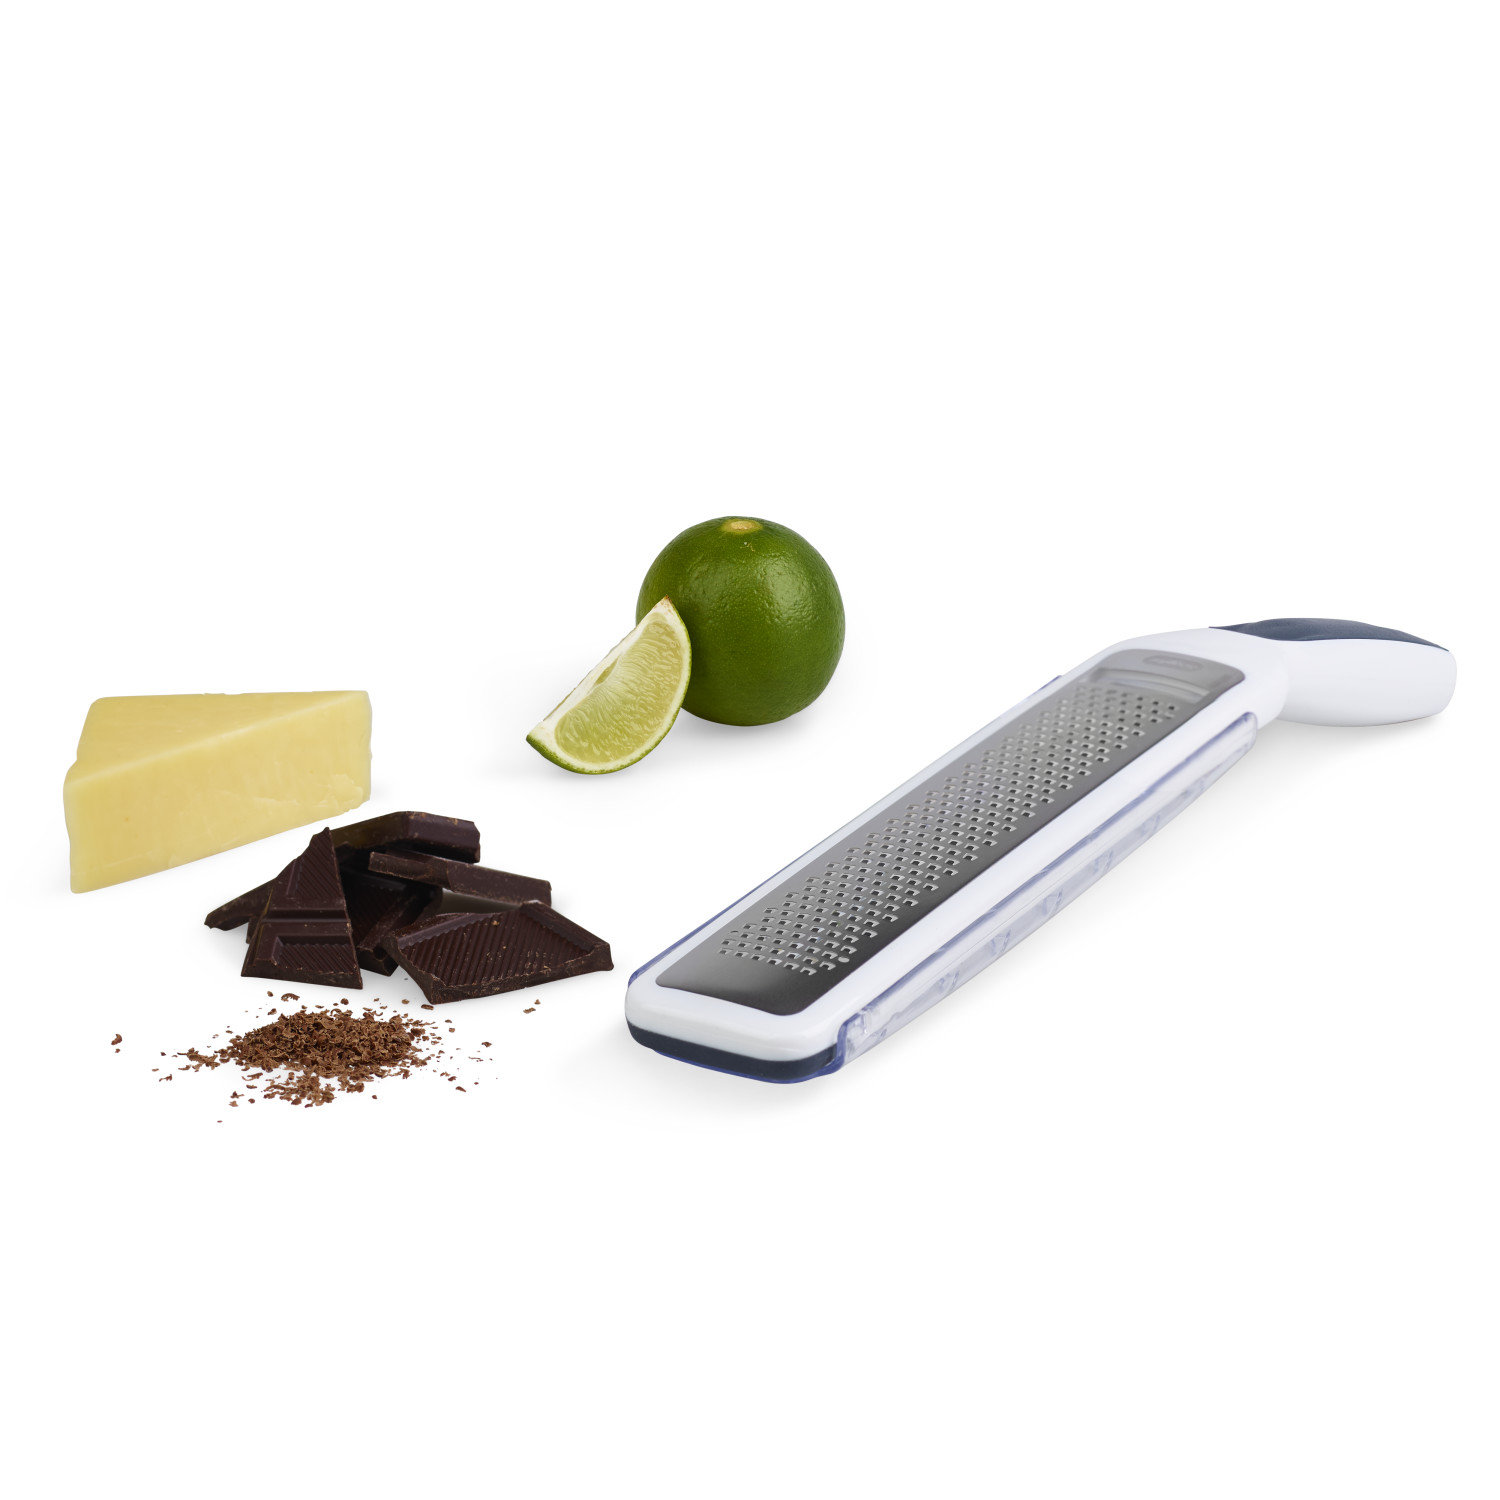 Zyliss Smooth Glide Rasp Grater & Reviews